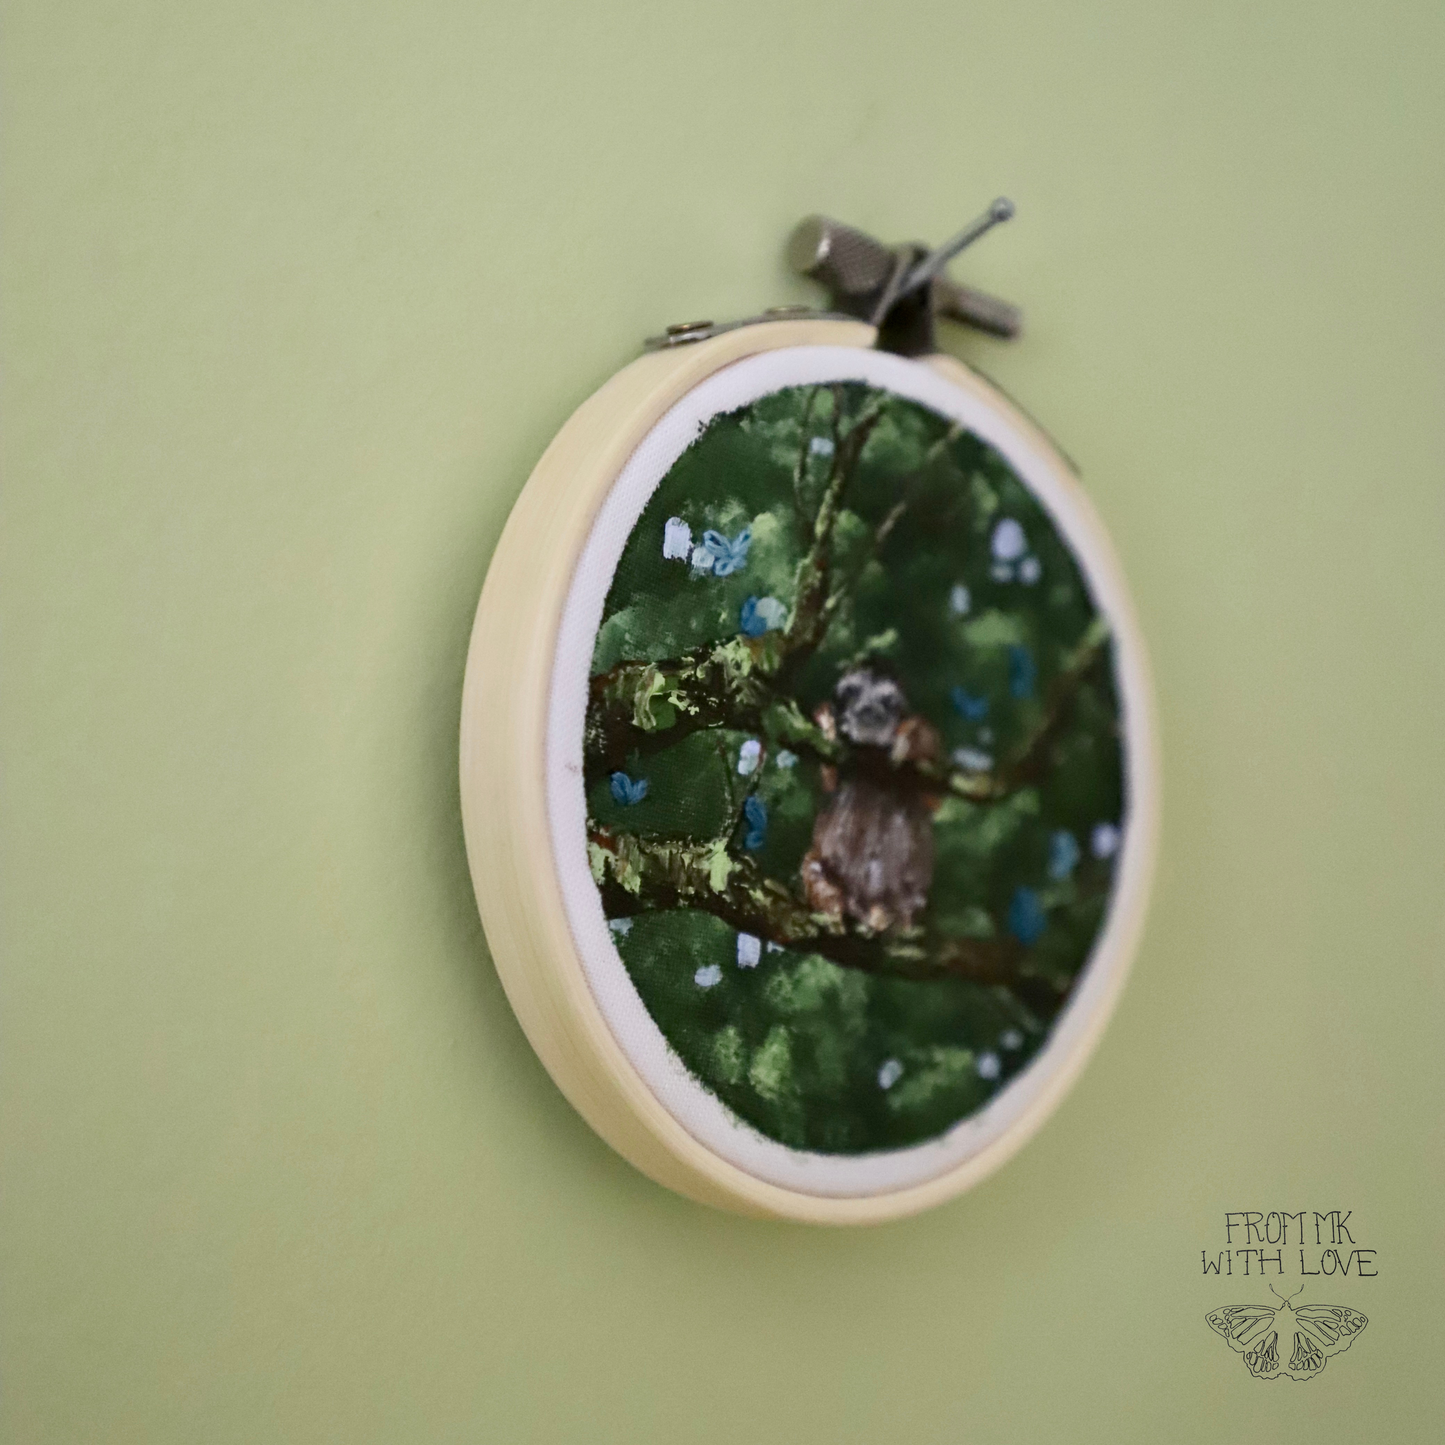 Sloth Embroidery - 3"